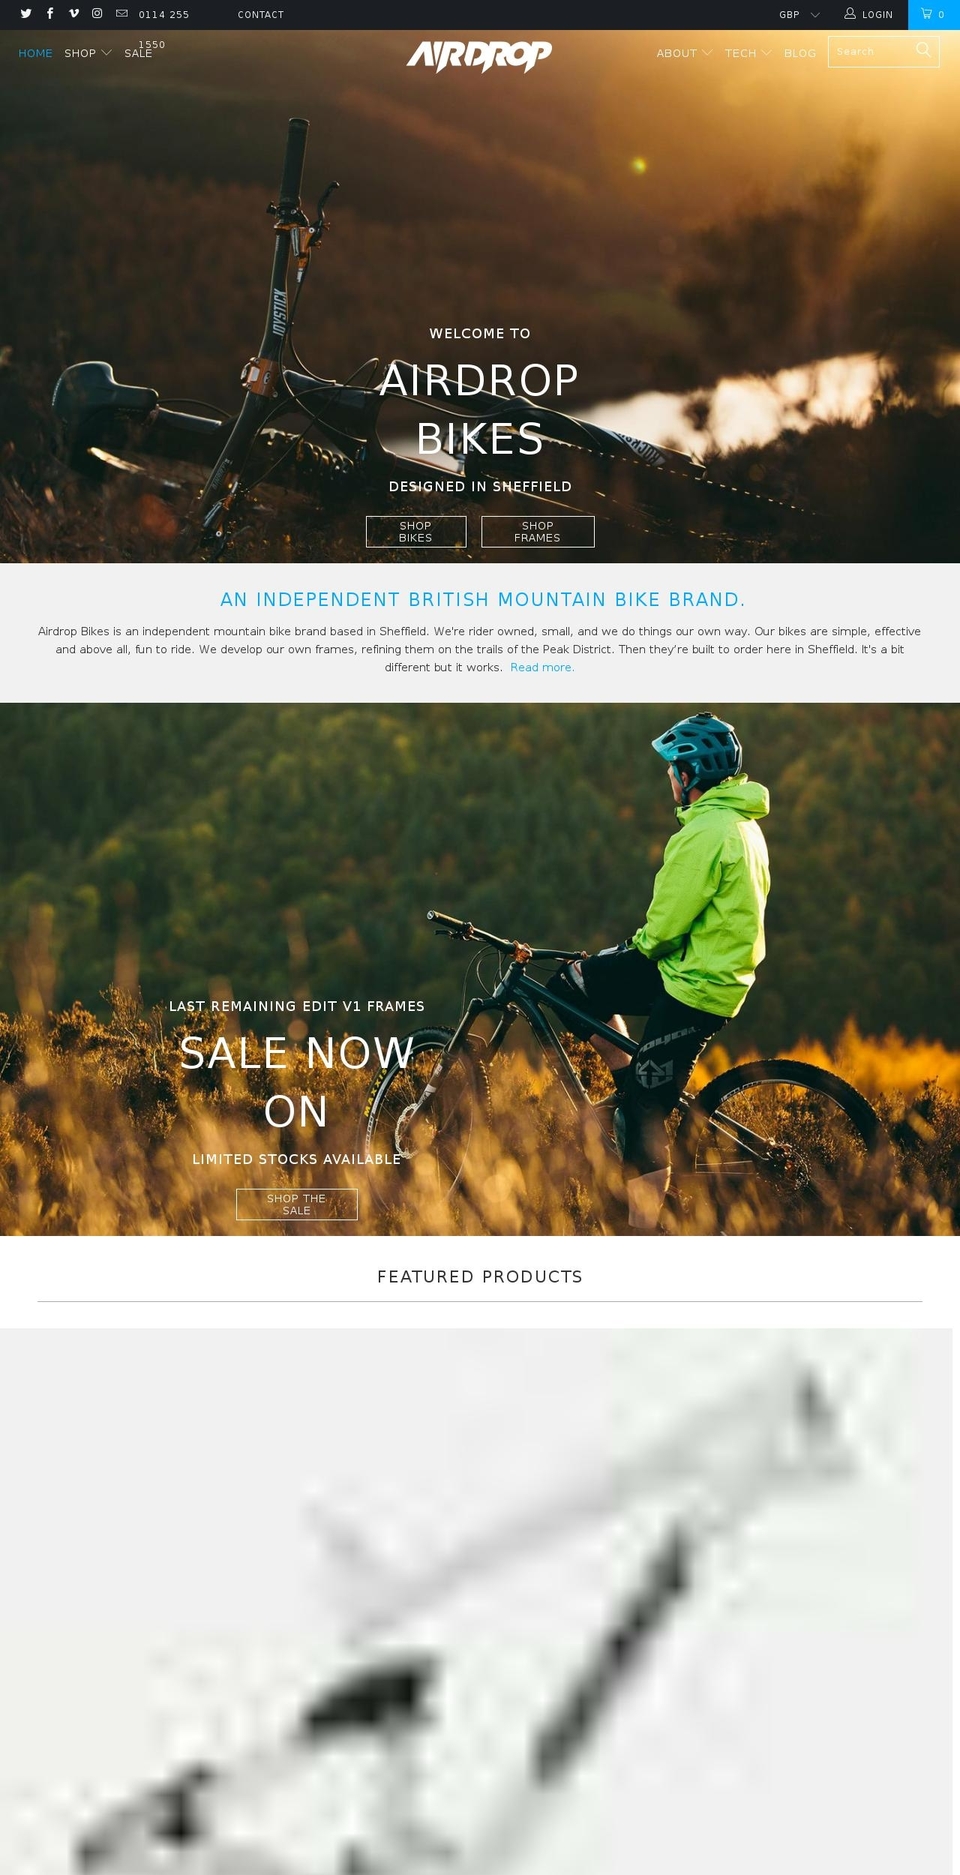 August Shopify theme site example airdropbikes.com